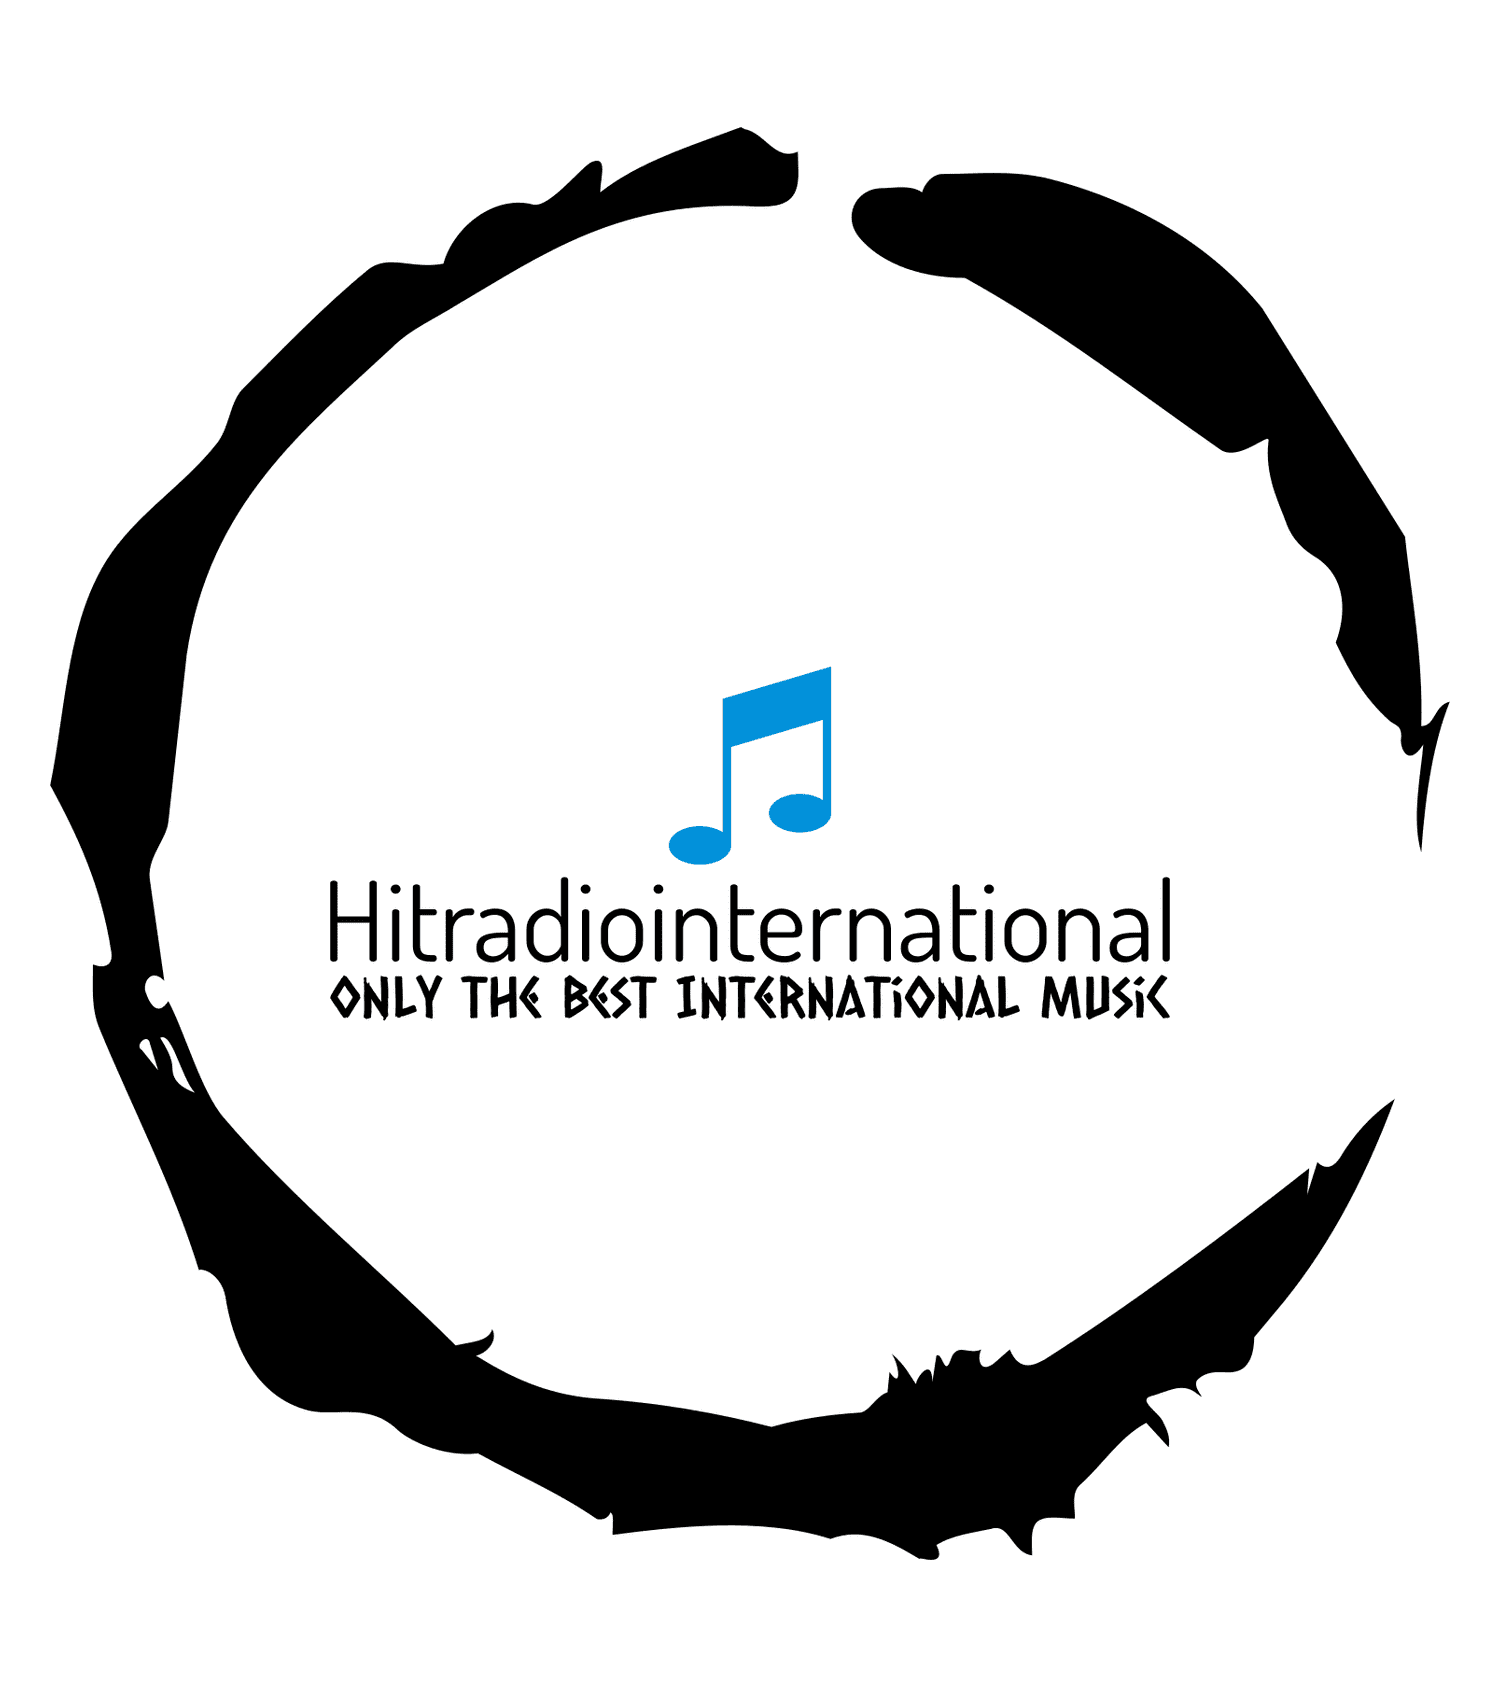 1 Radio Song Submission 2 Months On www.hitradiointernational.com ( MAX 4 MINS. )